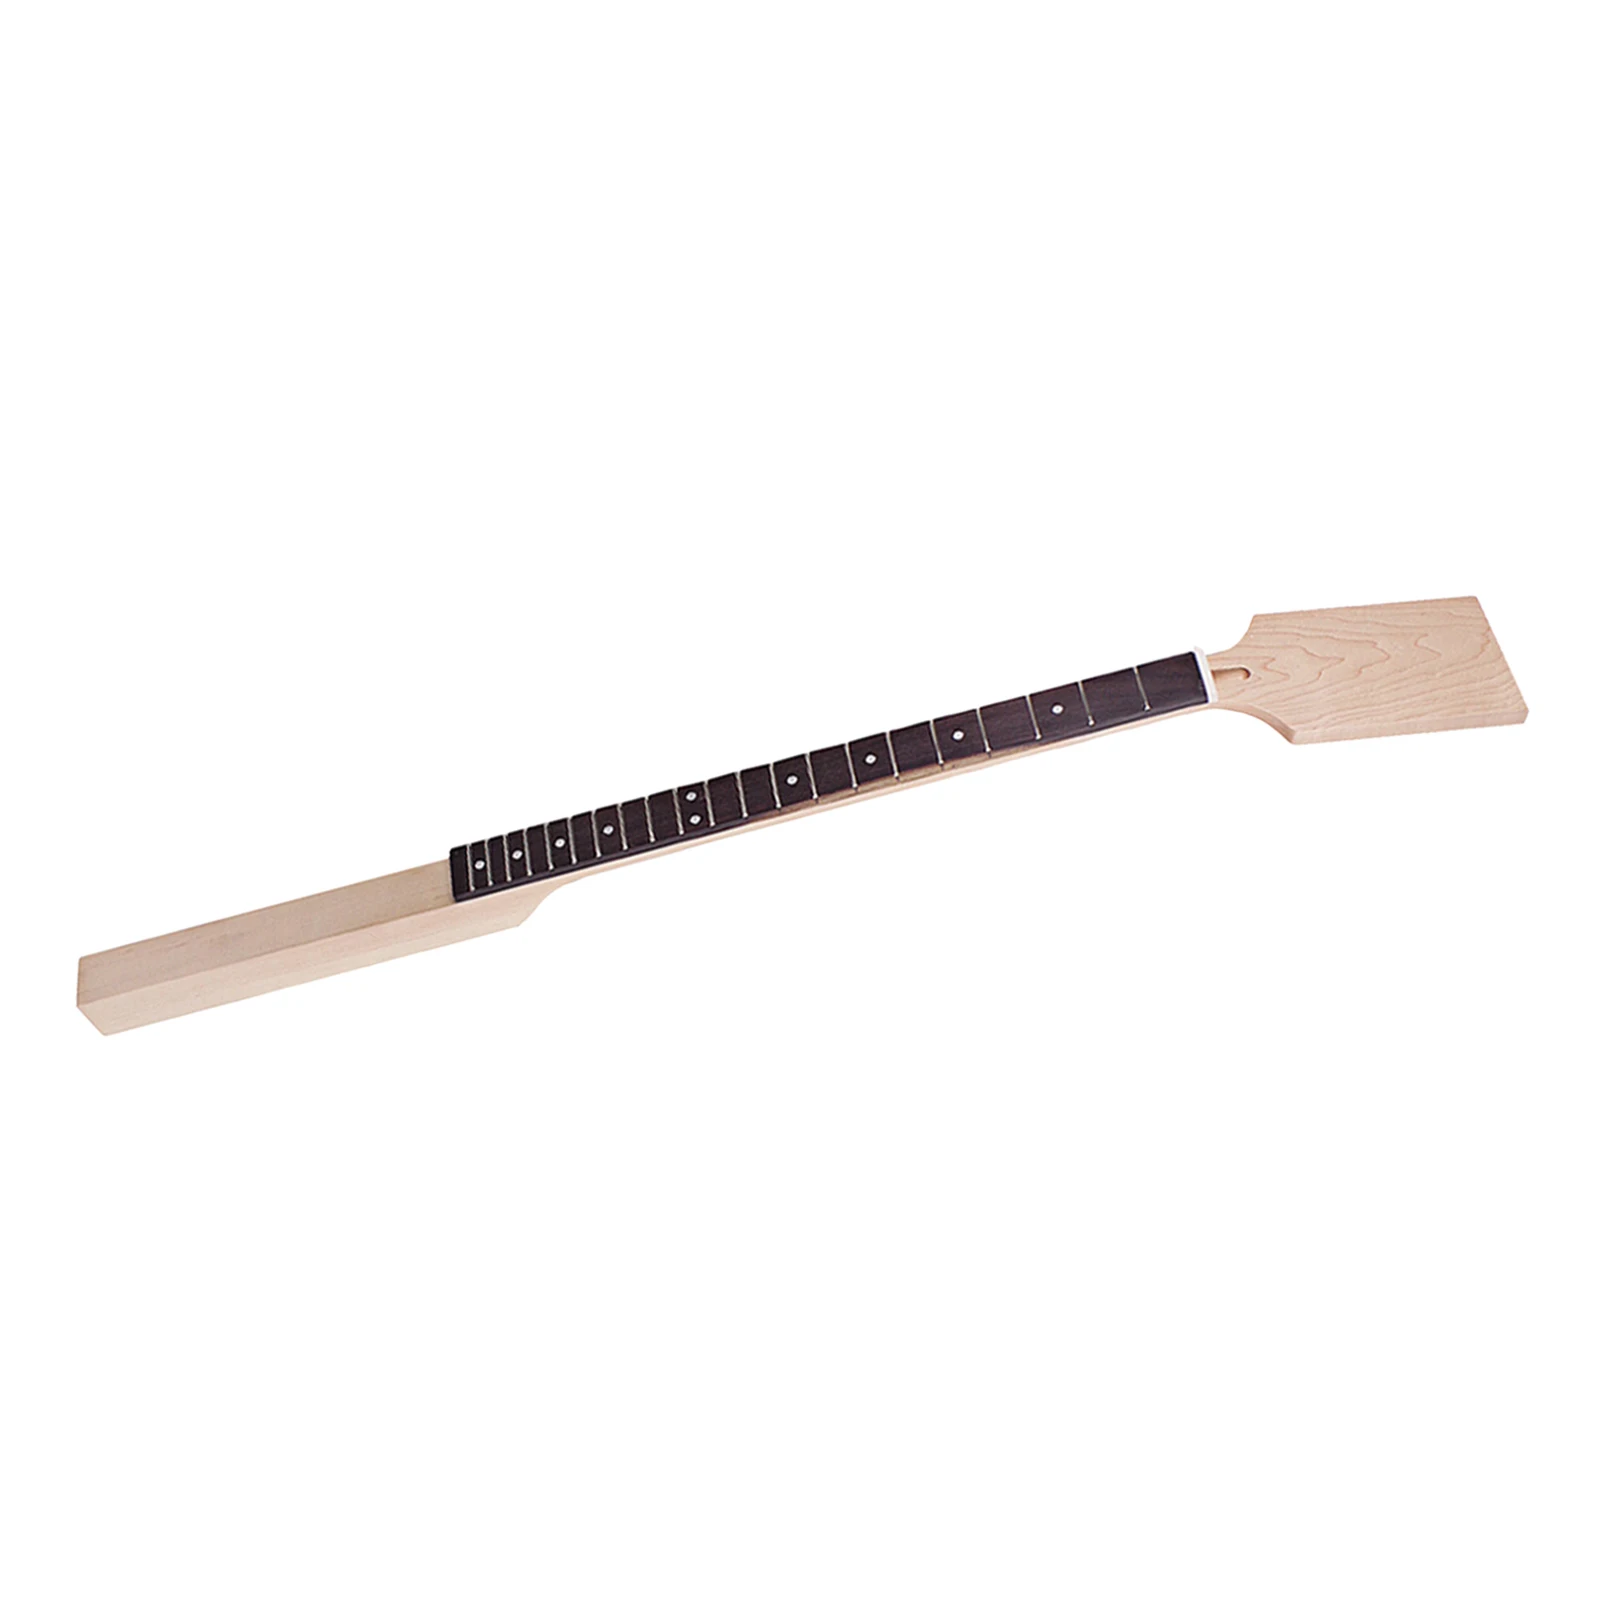 Unfinished 22 Frets Guitar Neck Neck Paddle Head Smooth Touch Gifts Parts